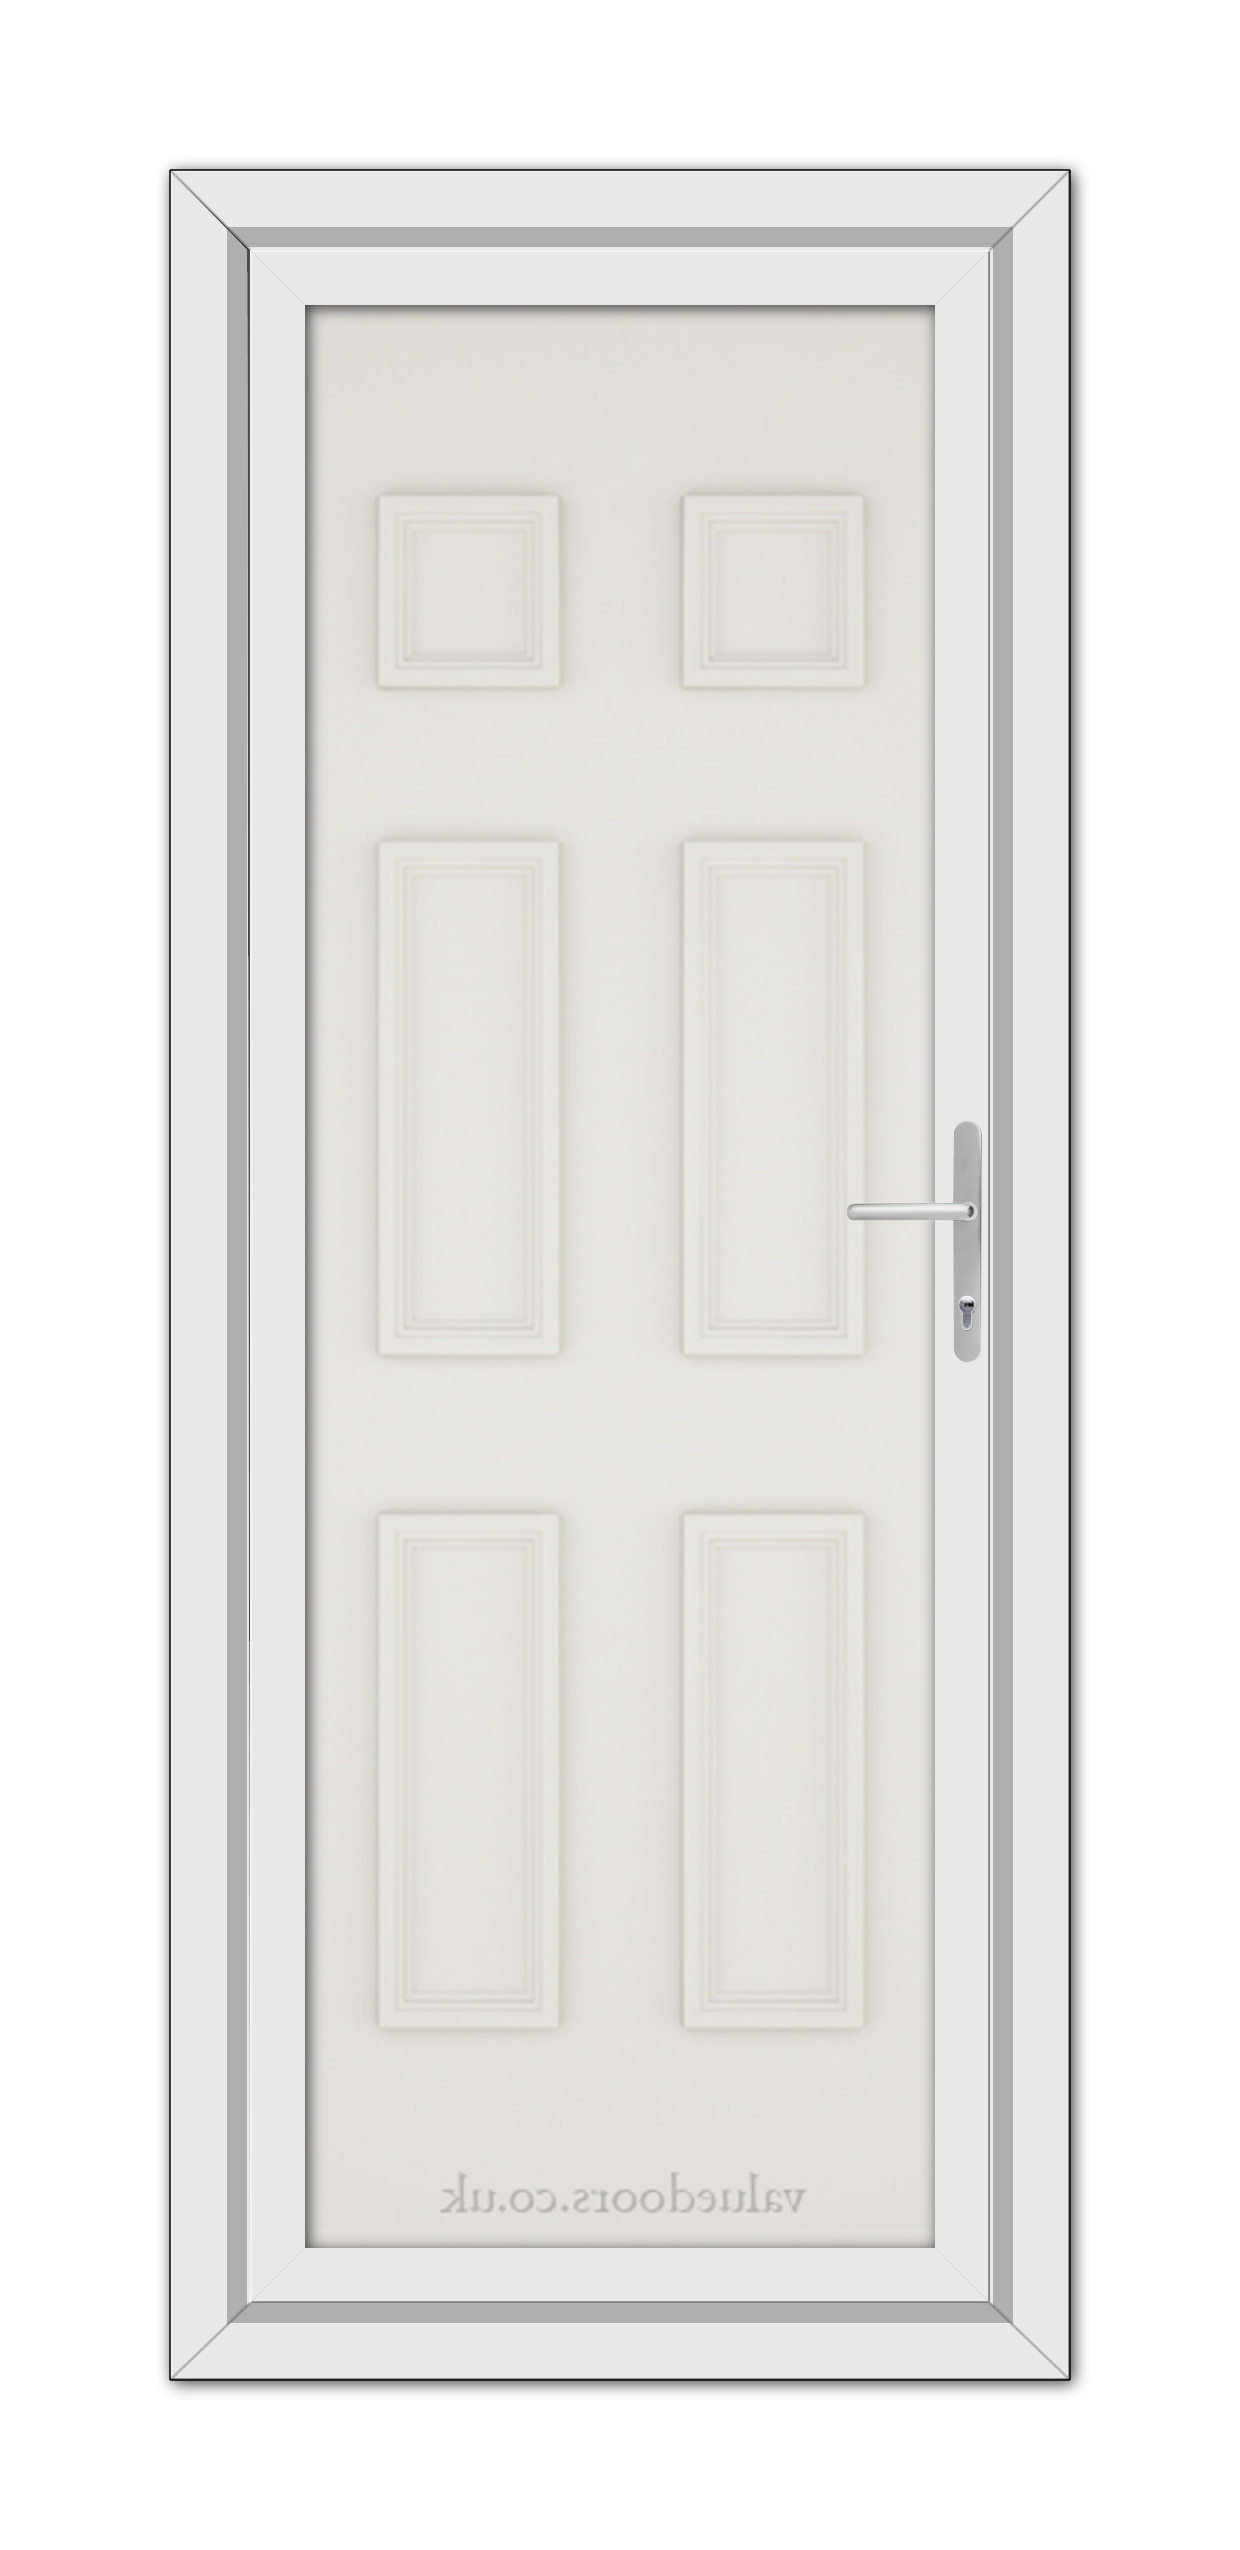 A vertical image of a closed White Cream Windsor Solid uPVC Door with six panels and a silver handle, set within a grey frame, viewed from the front.